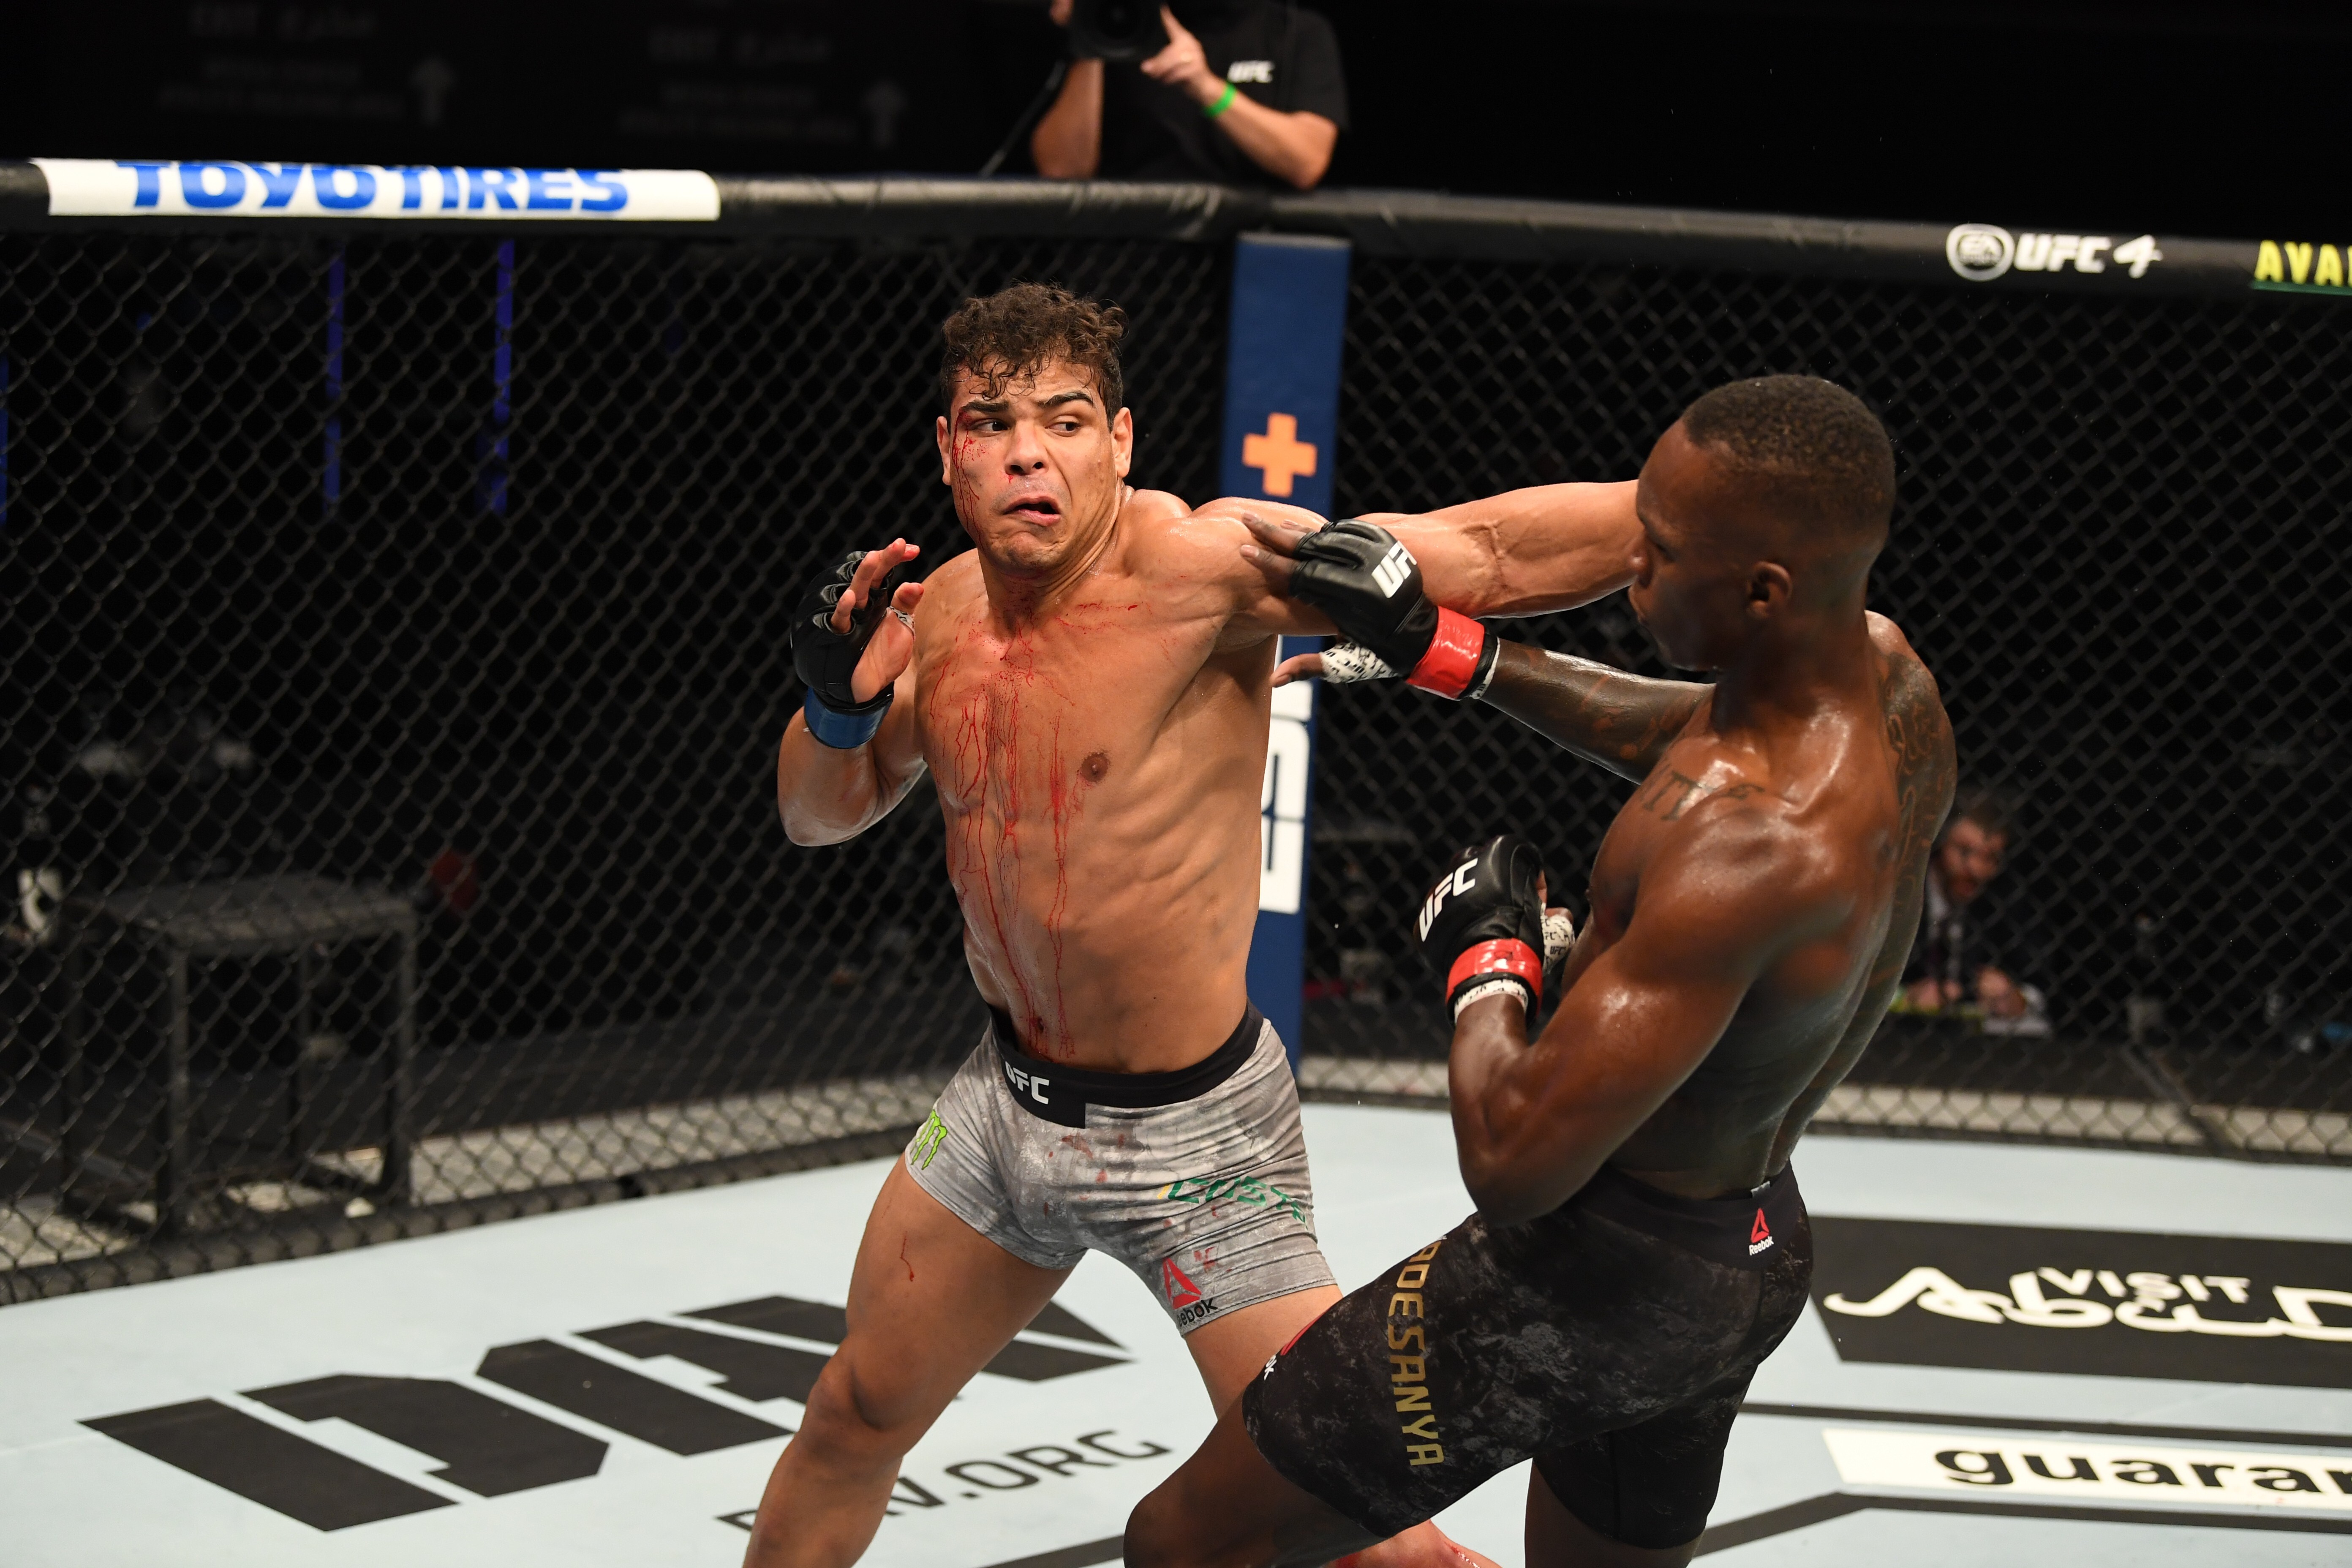 Paulo Costa said he may have still been drunk when he fought, and lost, to Israel Adesanya. Photo: Zuffa LLC